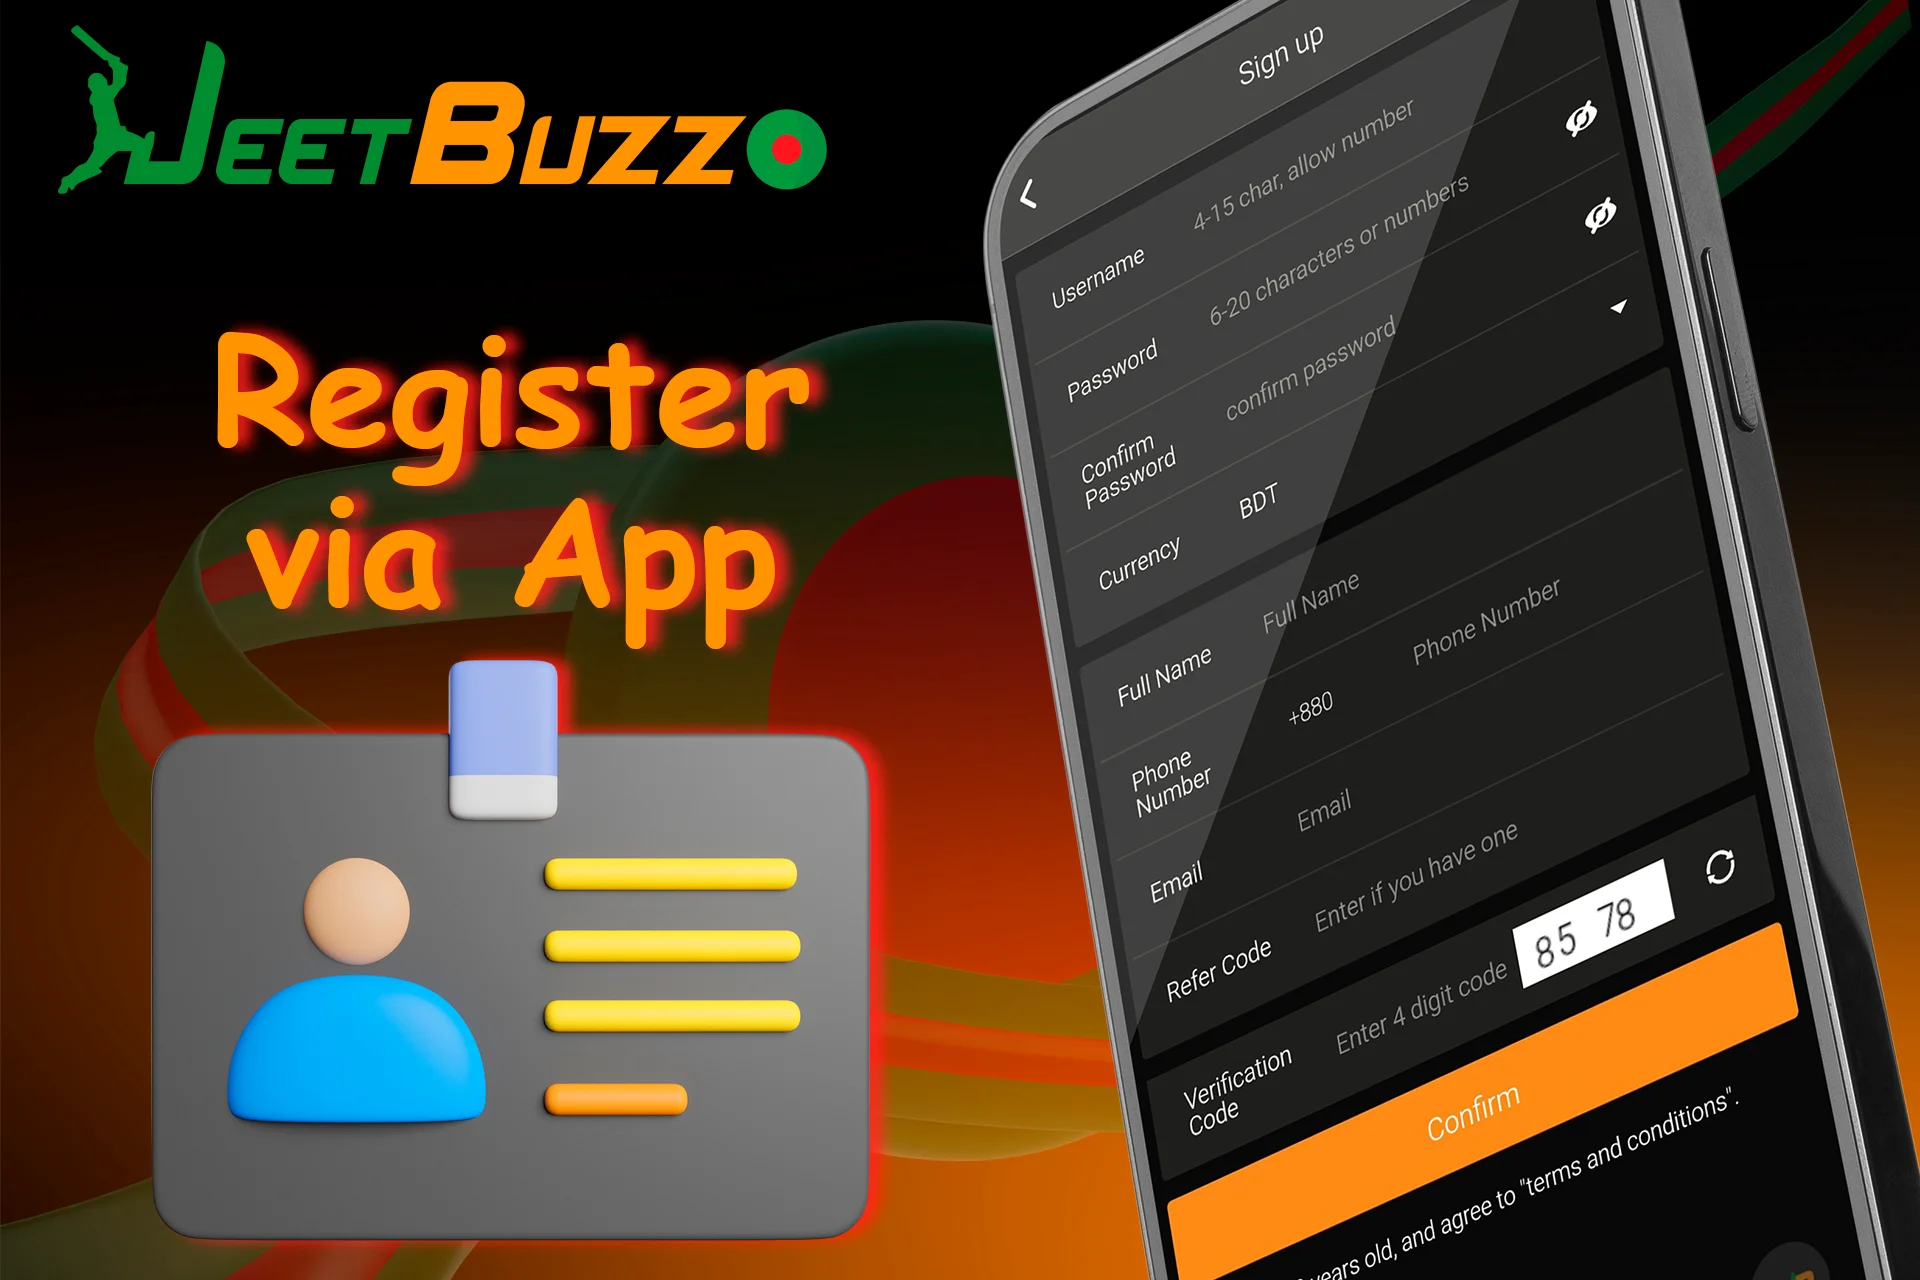 brief instructions for registering a new user through the application